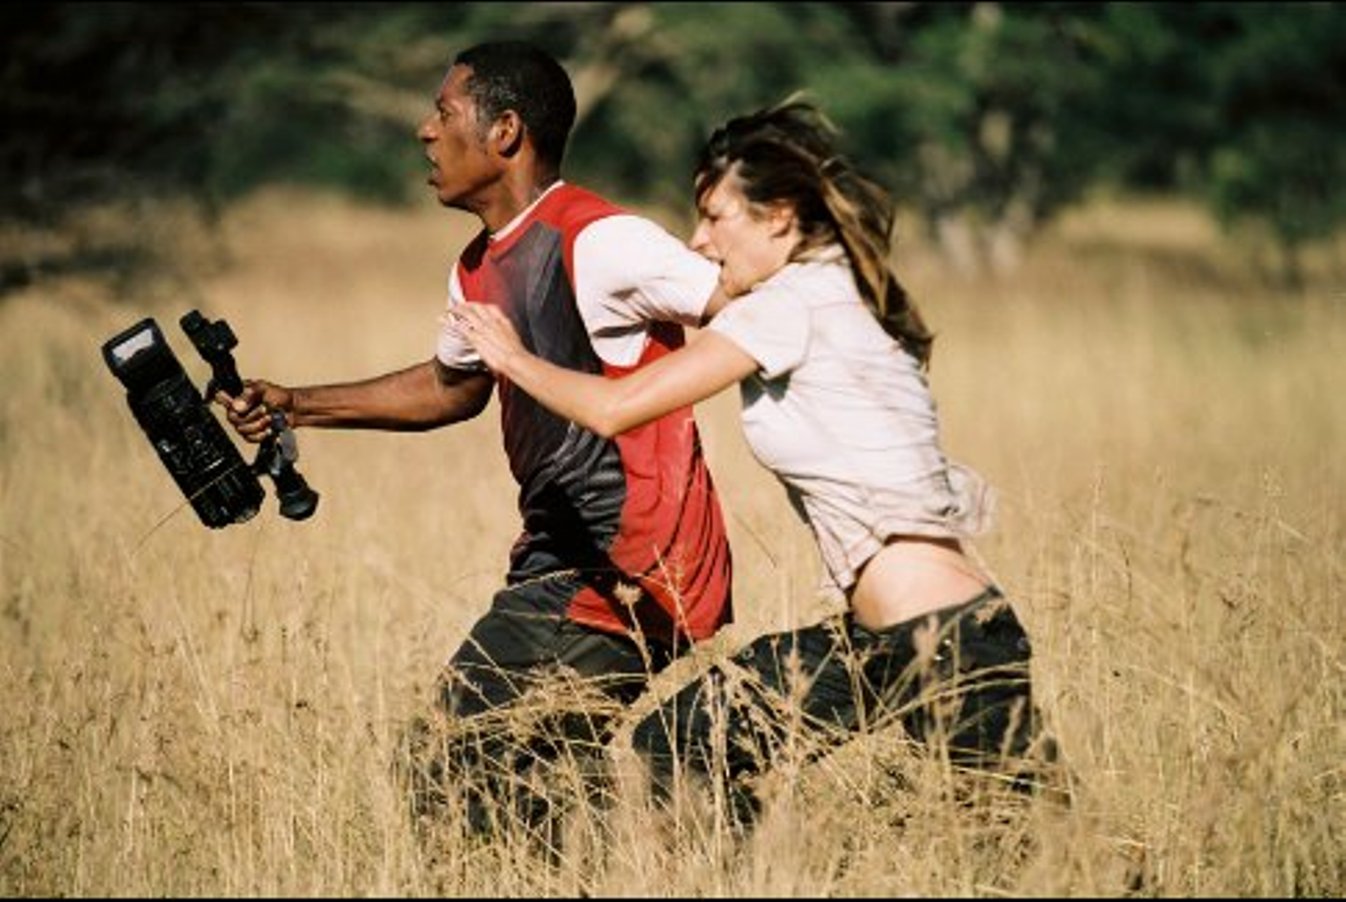 Orlando Jones and Brooke Langton were hoping this would be a lot more like Chariots of Fire than it turned out to be.